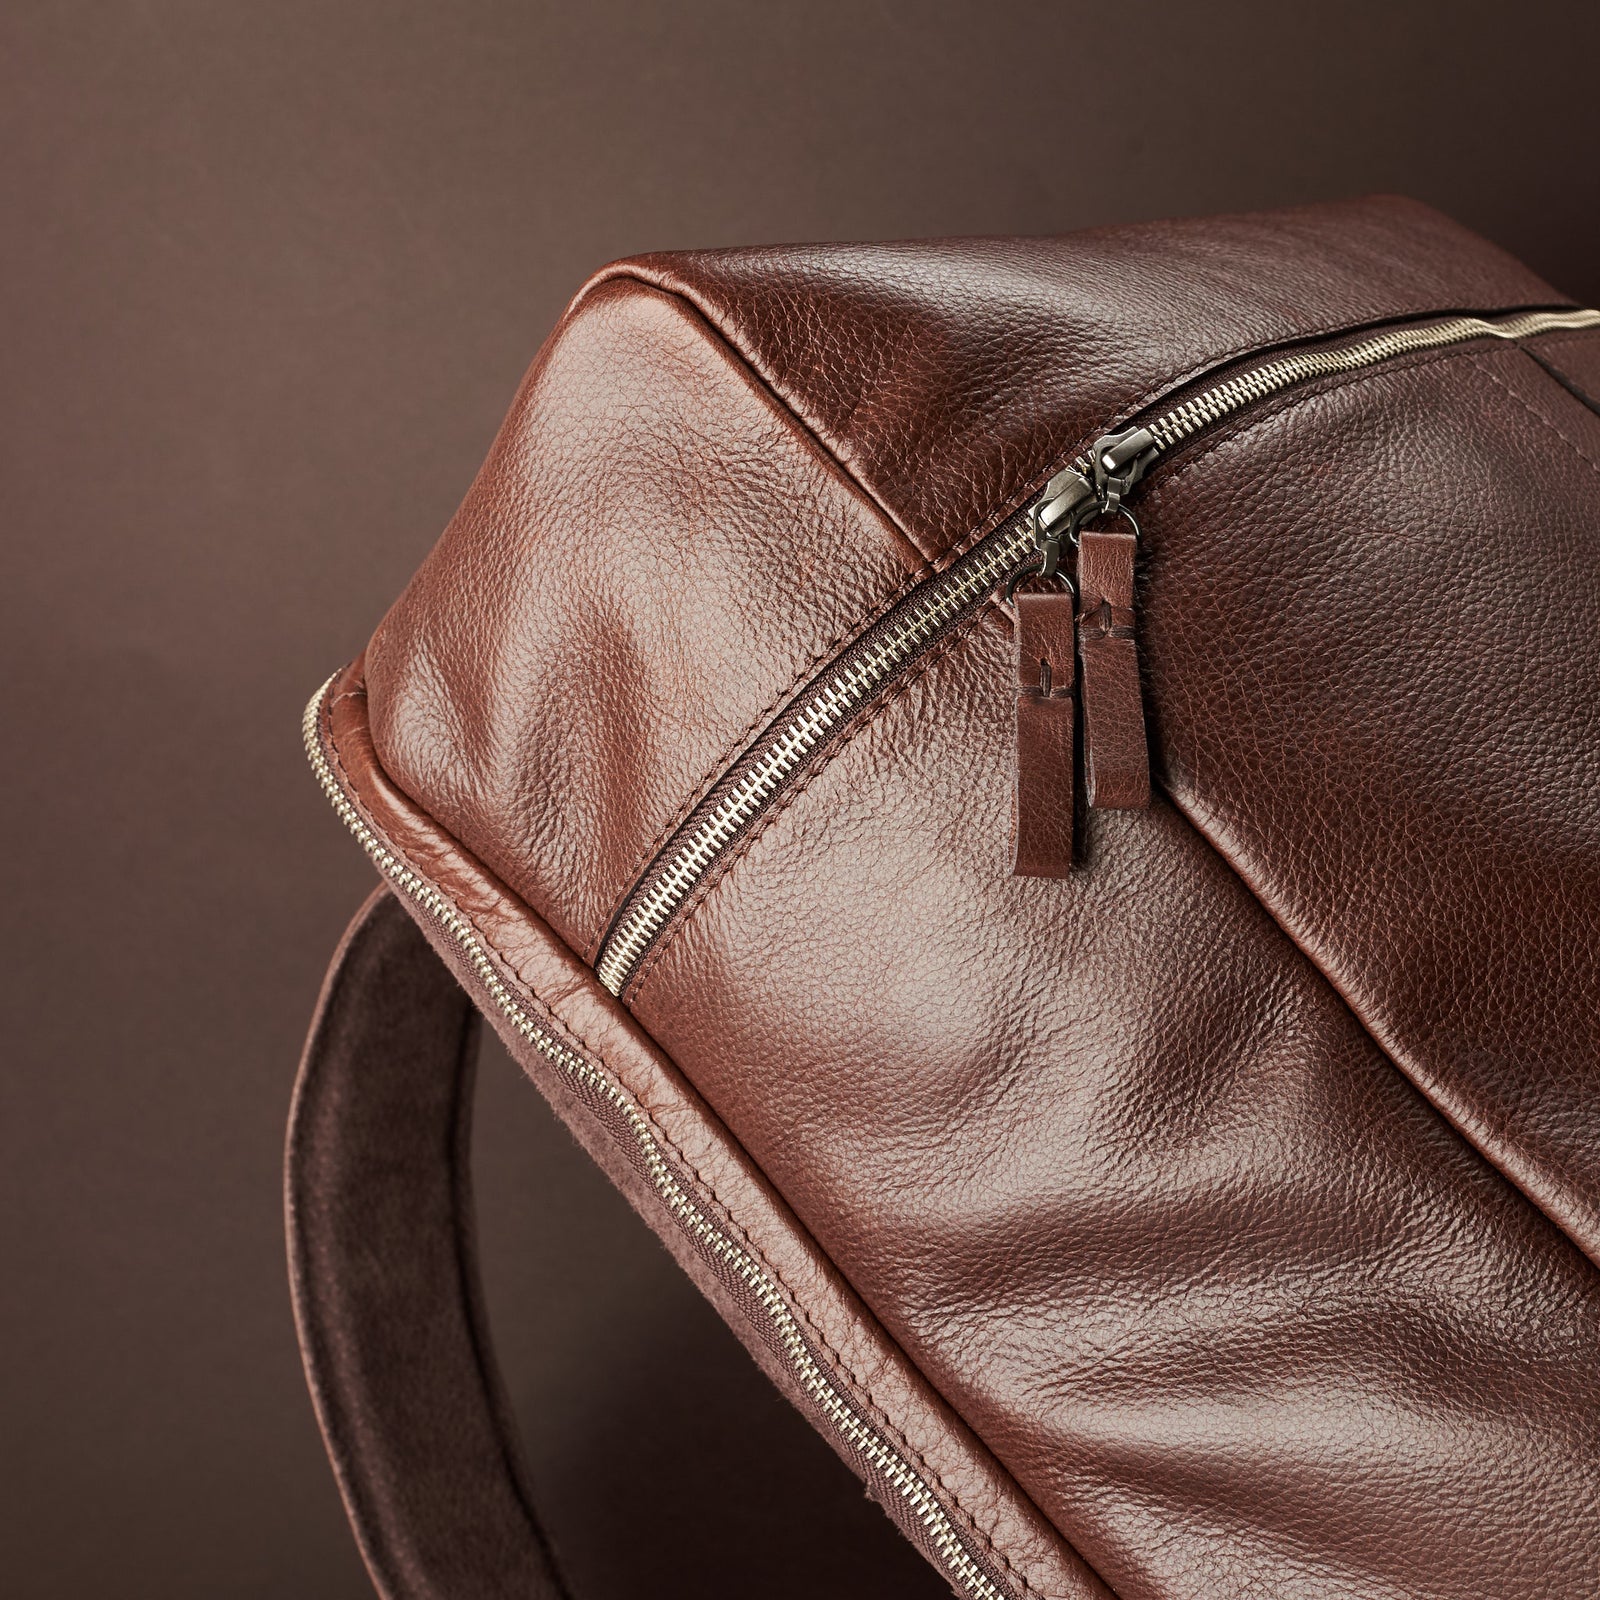 Everything About Leather Conditioning For Bags